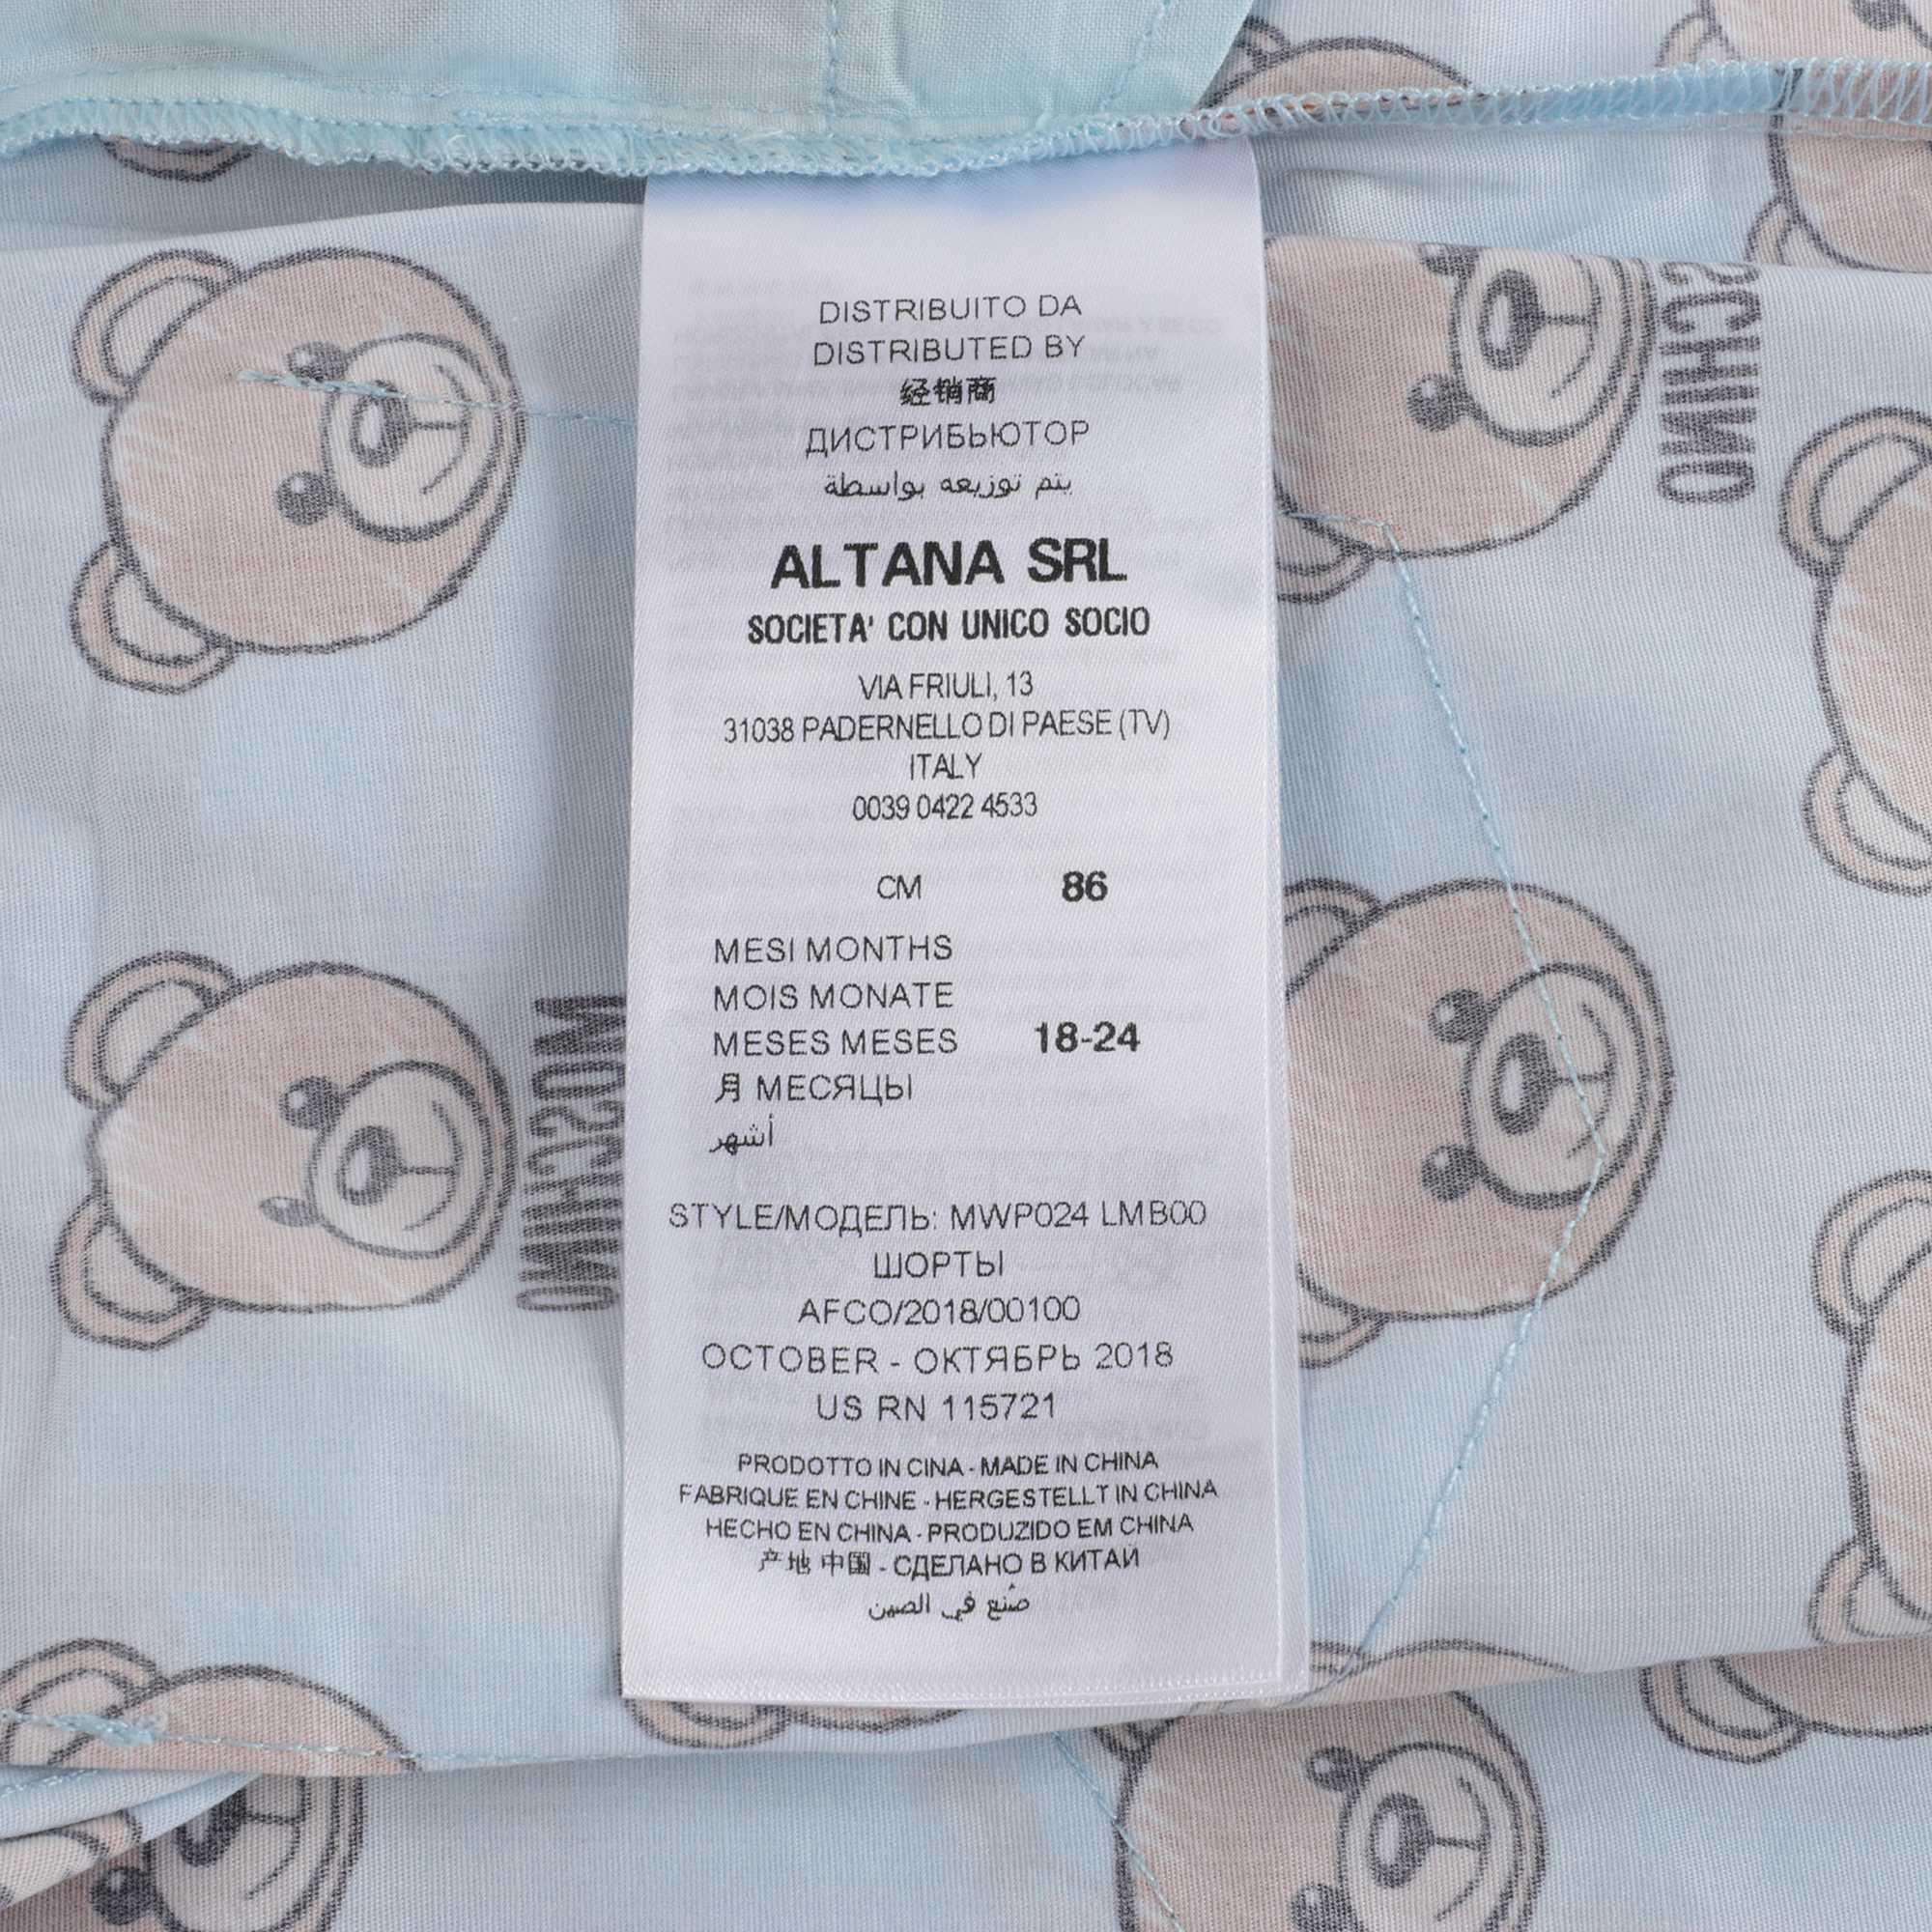 Baby Boys Blue Toy Cotton Shorts